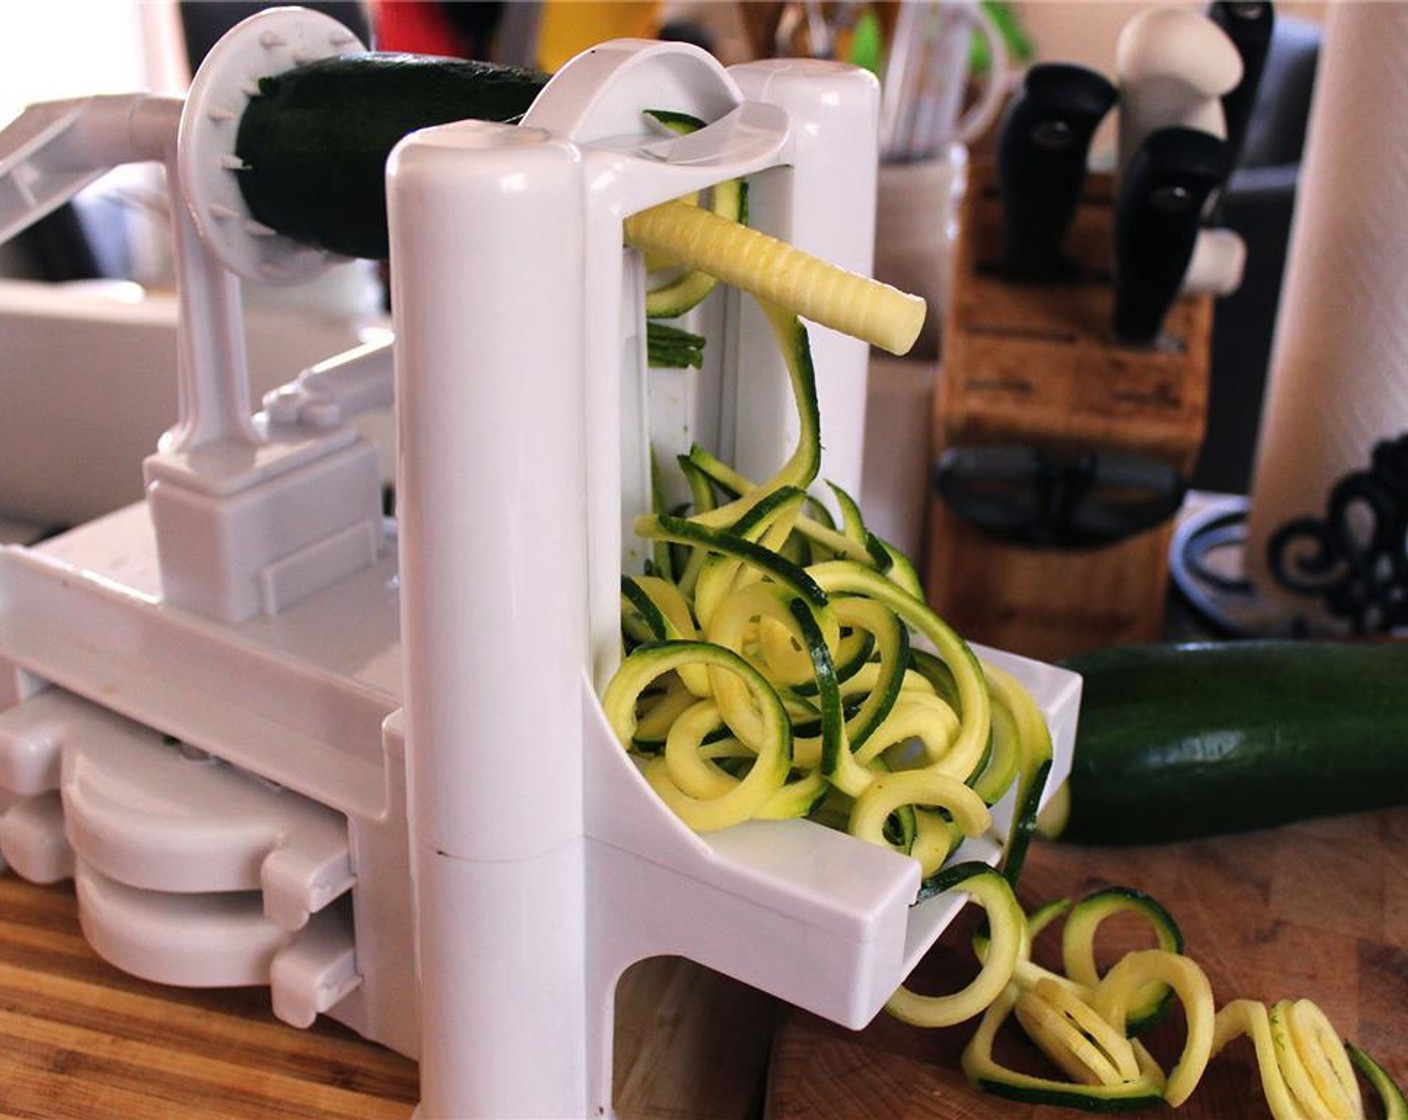 step 4 While the tomatoes are roasting, prepare the Zucchini (4) using either a spiralizer, vegetable peeler, or julienne peeler. Set aside in a large bowl.